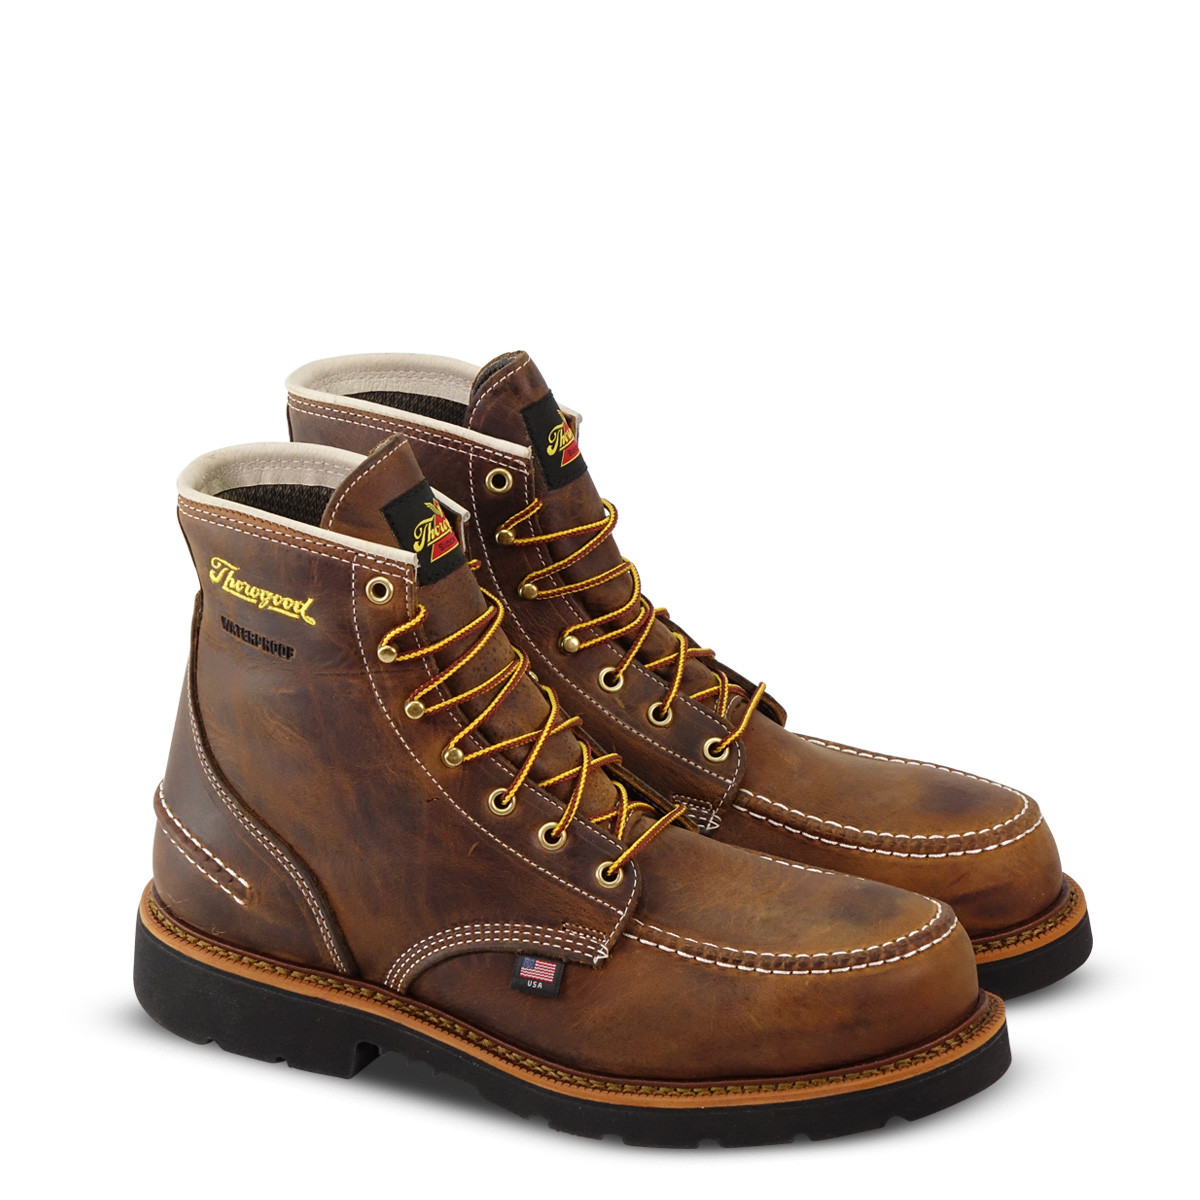 mens safety toe boots